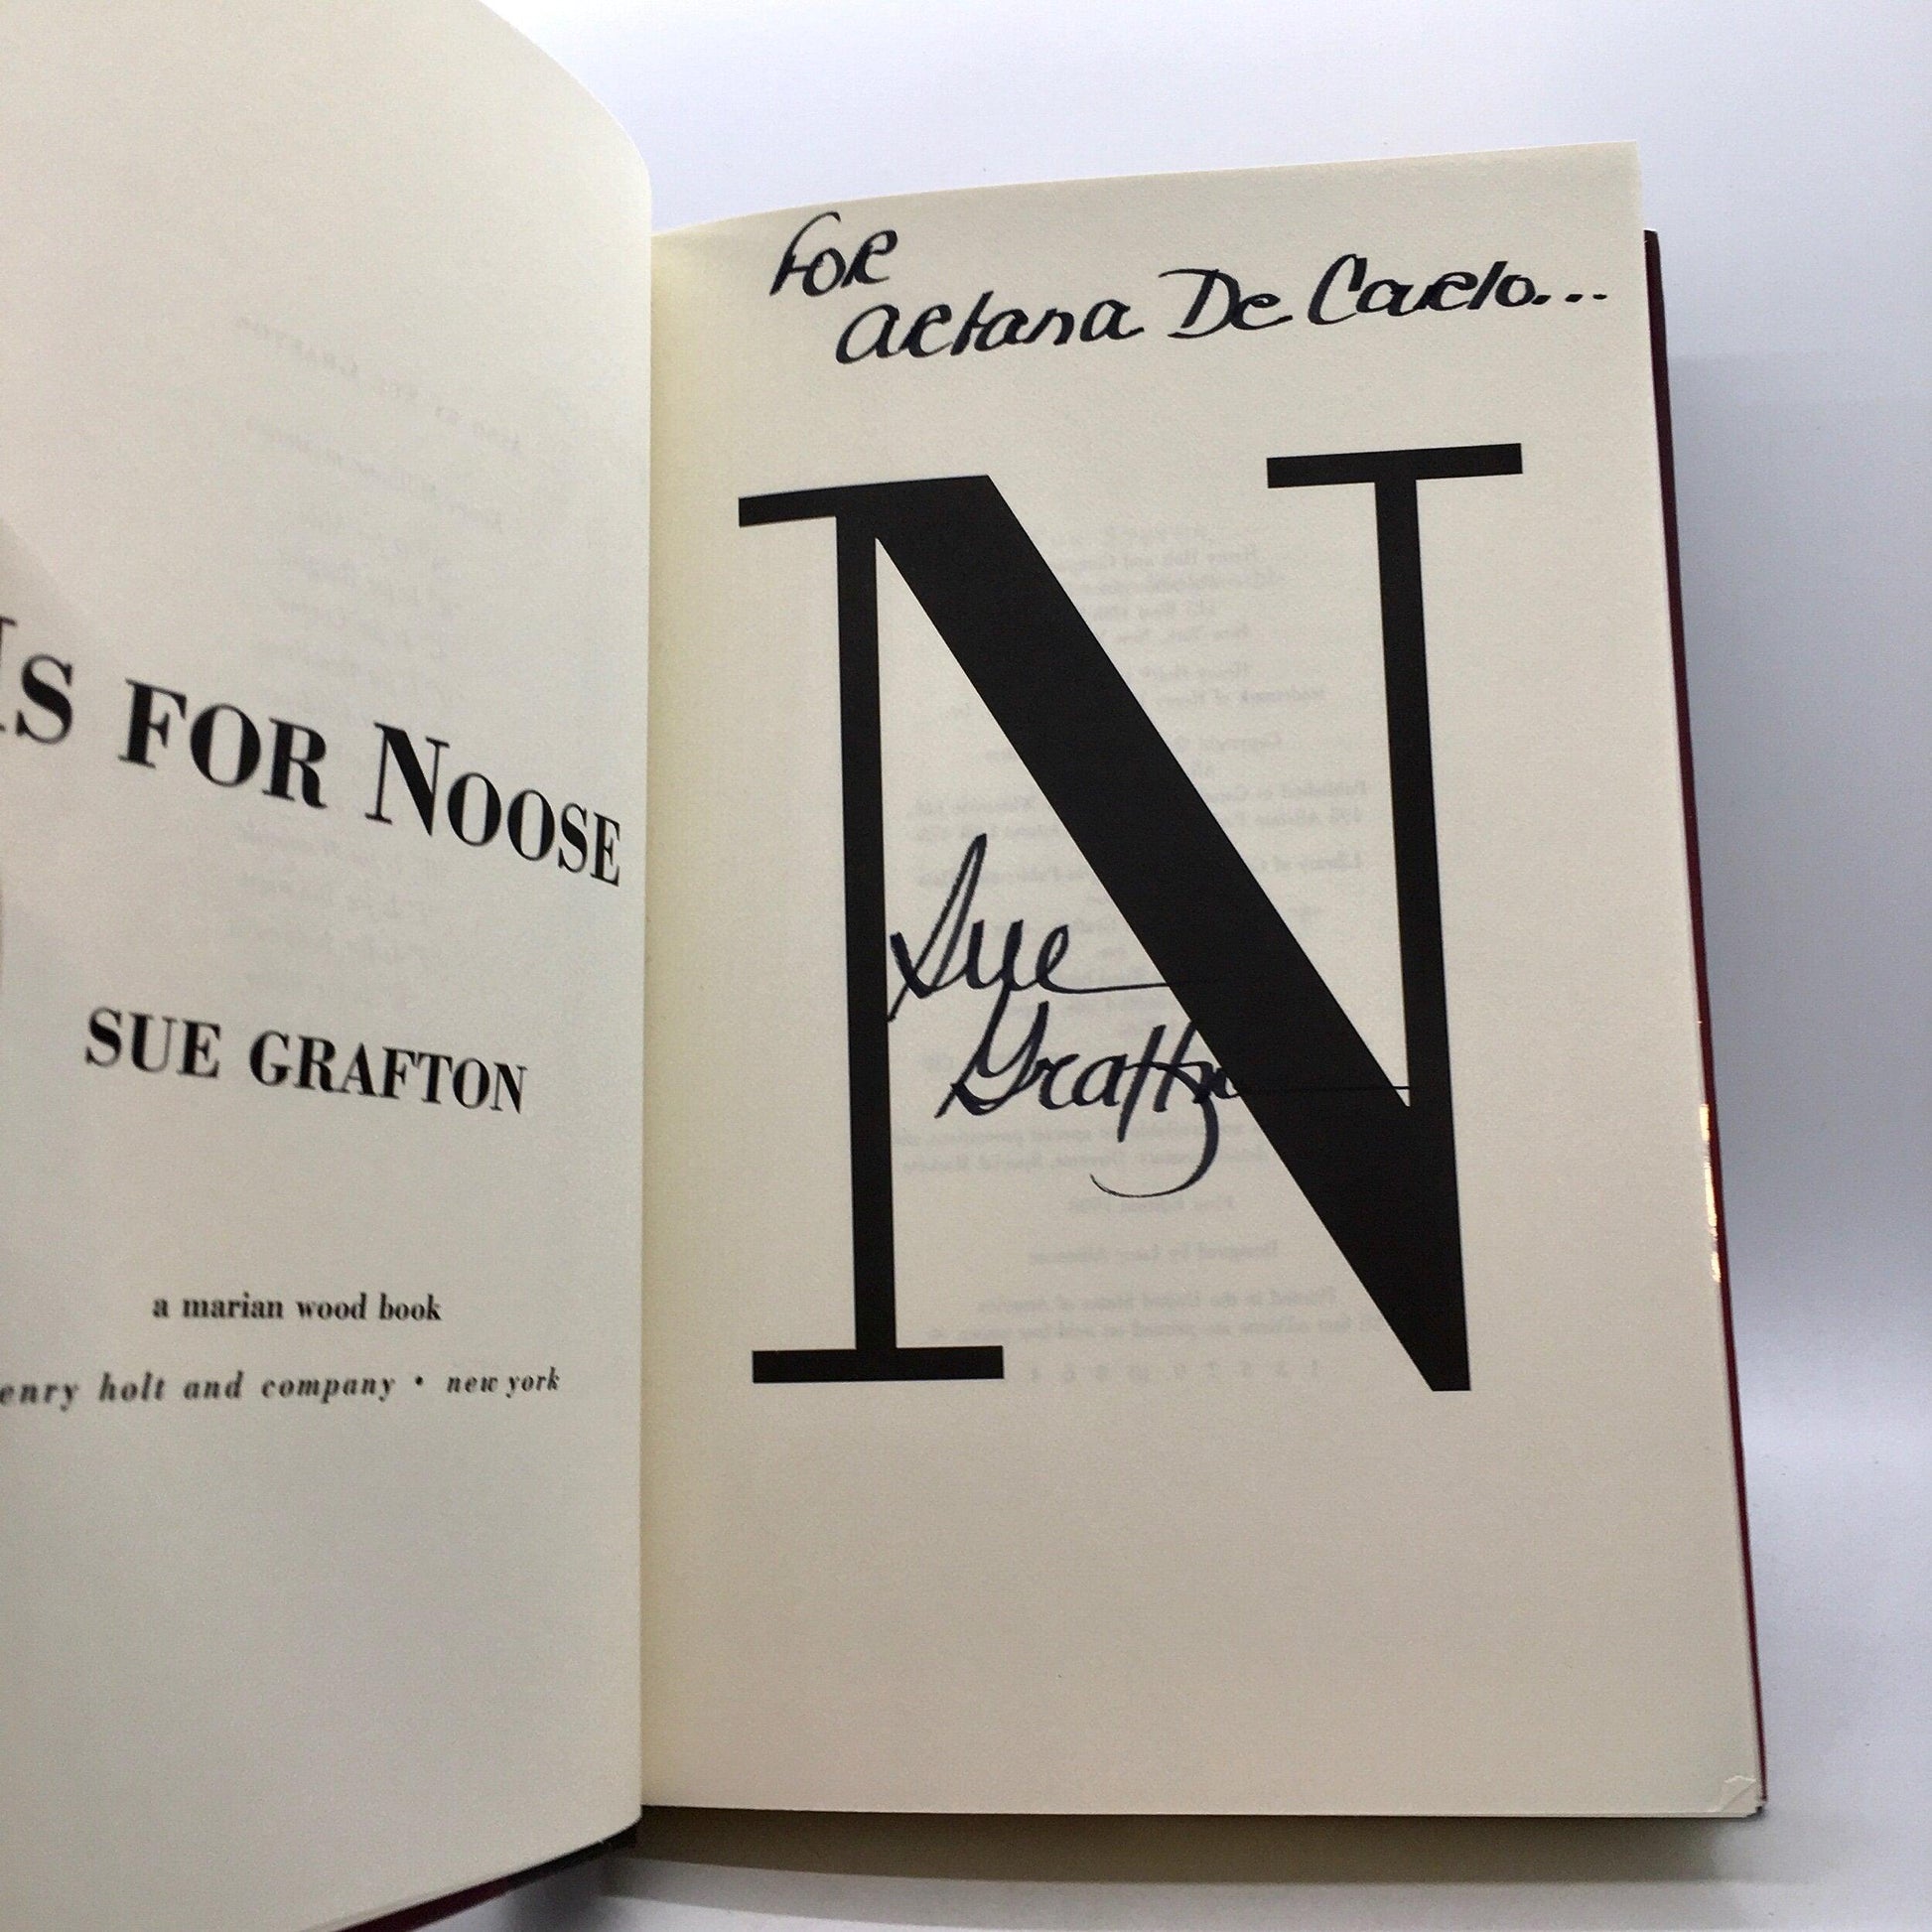 GRAFTON, Sue "N is For Noose" [Henry Holt, 1998] 1st Edition (Signed) - Buzz Bookstore